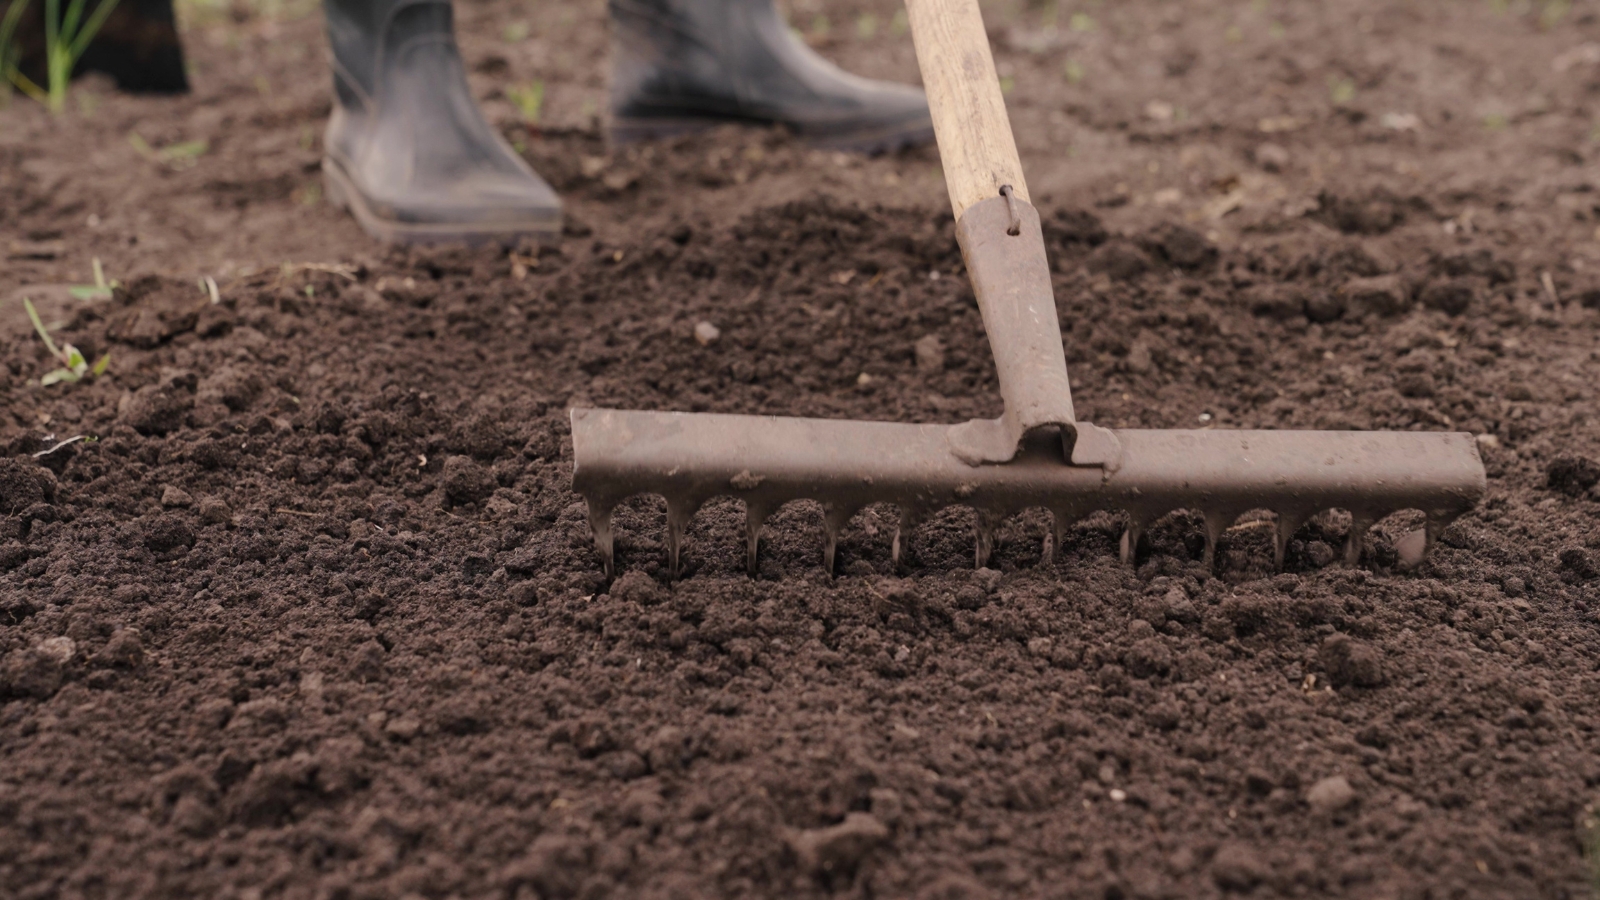 A person wearing black boots meticulously rakes through the rich, dark soil, tending to the garden with care and precision, preparing it for planting and nurturing vibrant life to flourish.